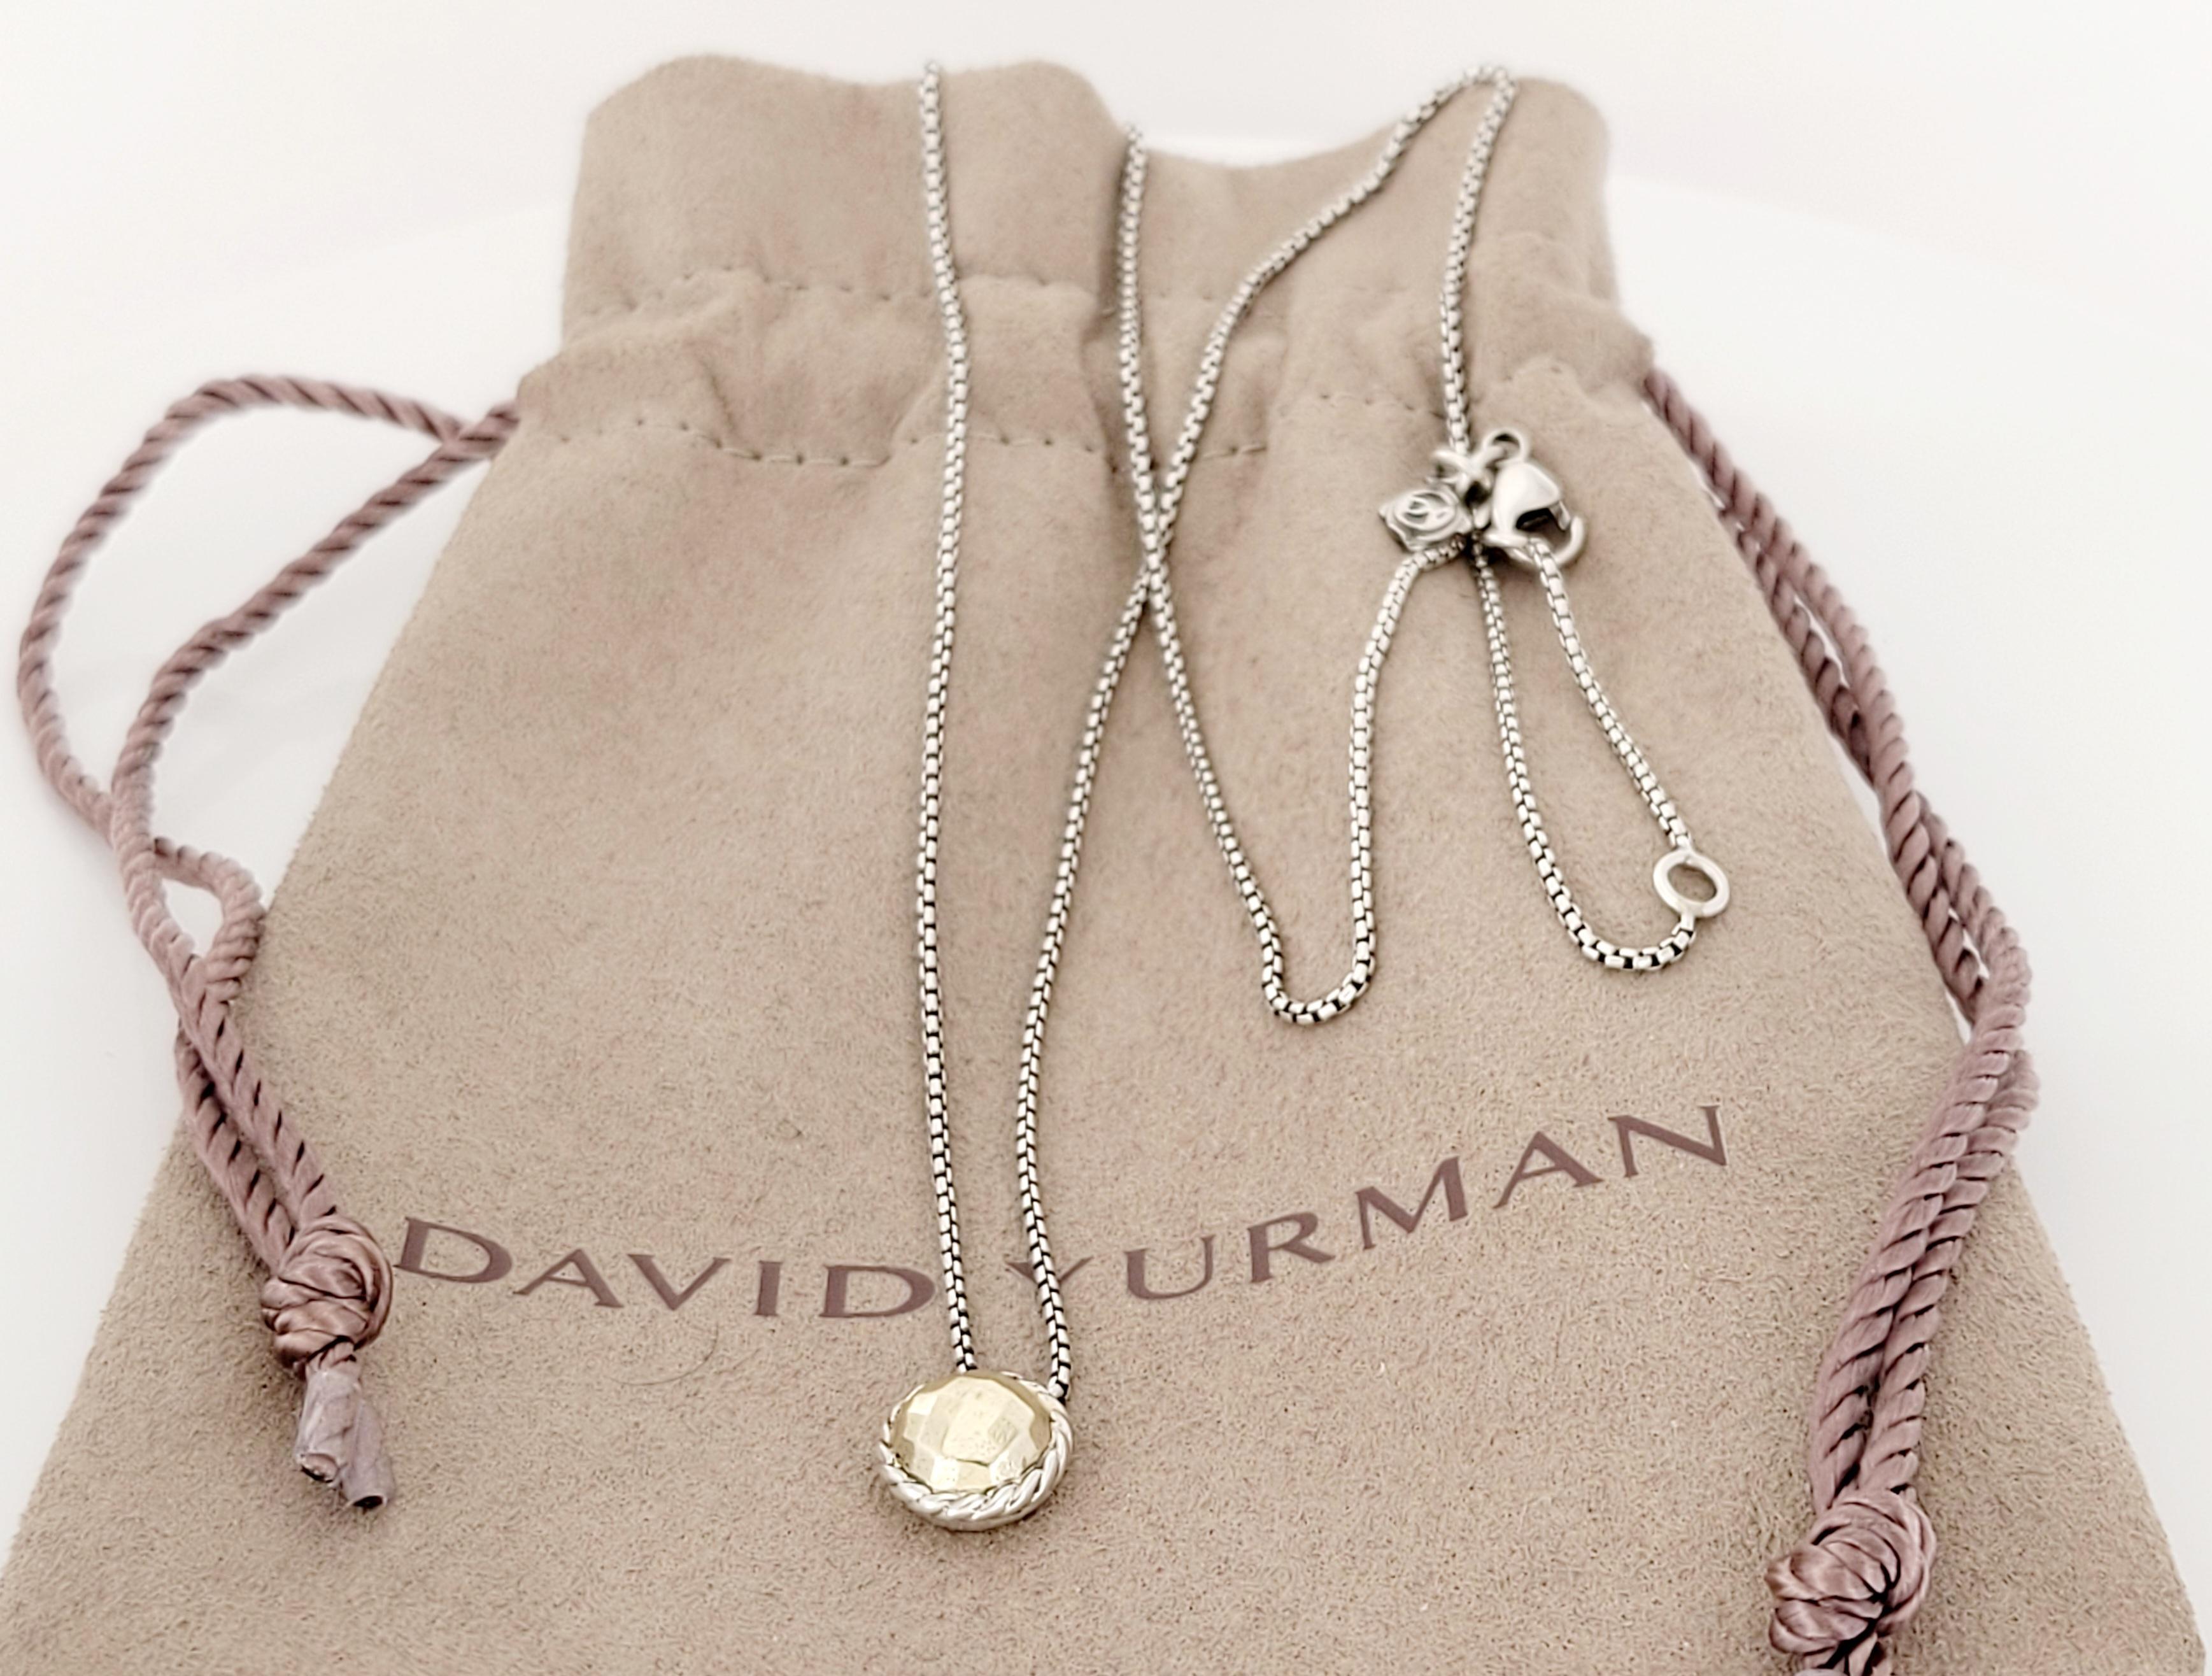 David Yurman Chatelaine Necklace with 18k Gold For Sale 1